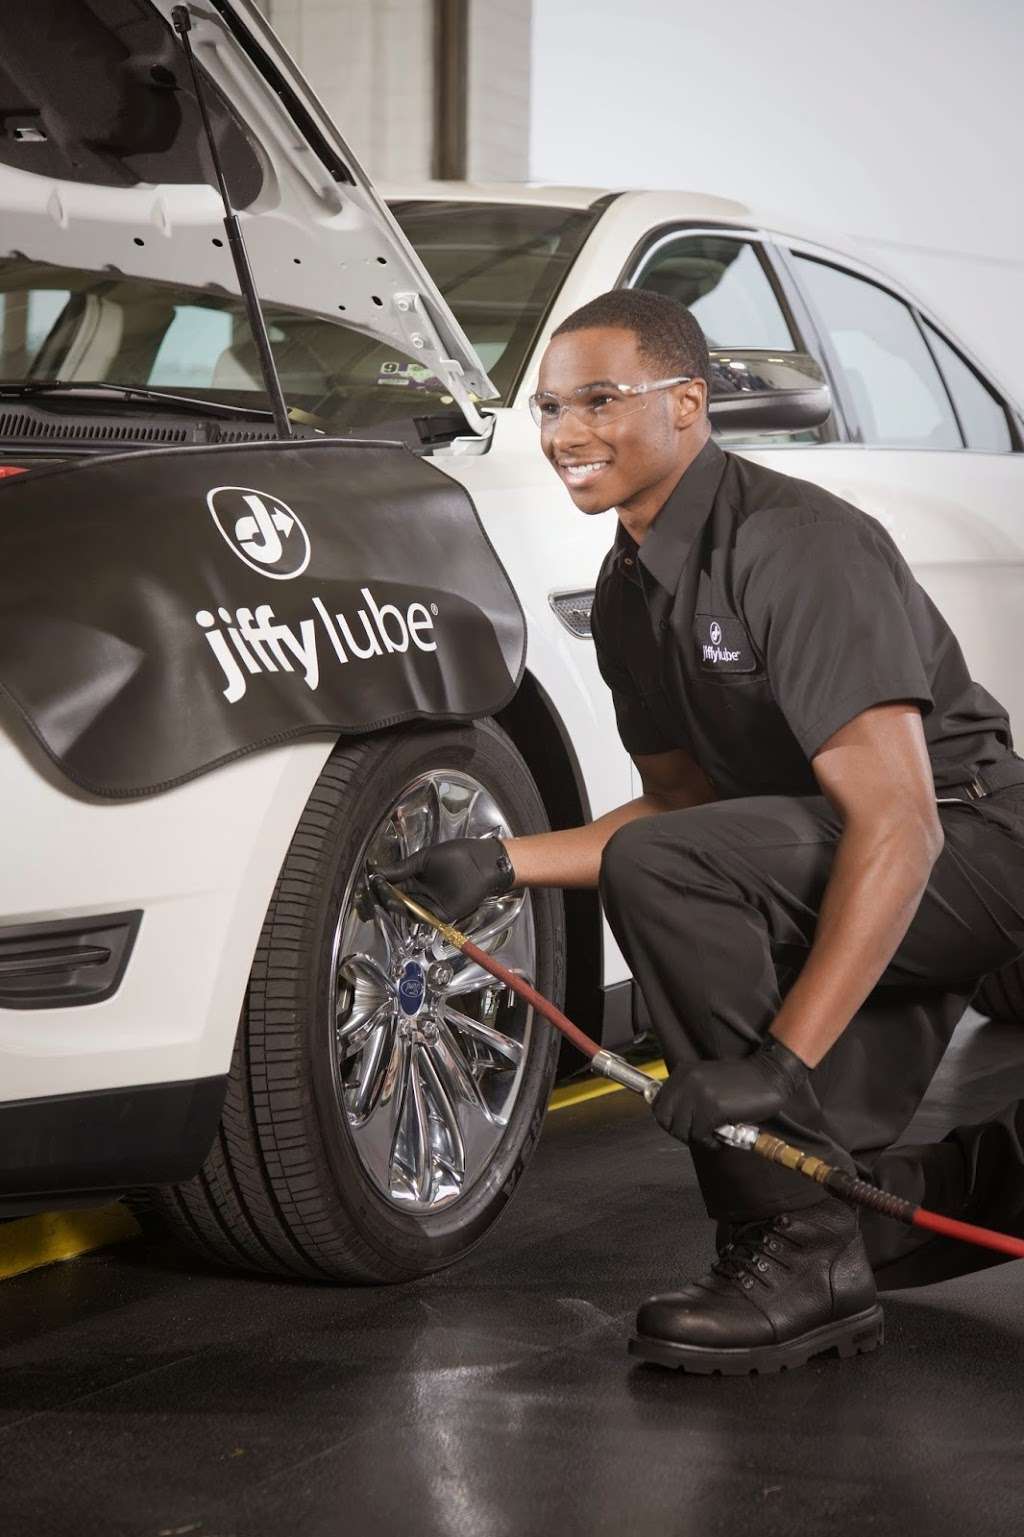 Jiffy Lube | 802 Ahrens Rd, Chesterton, IN 46304, USA | Phone: (219) 926-3636